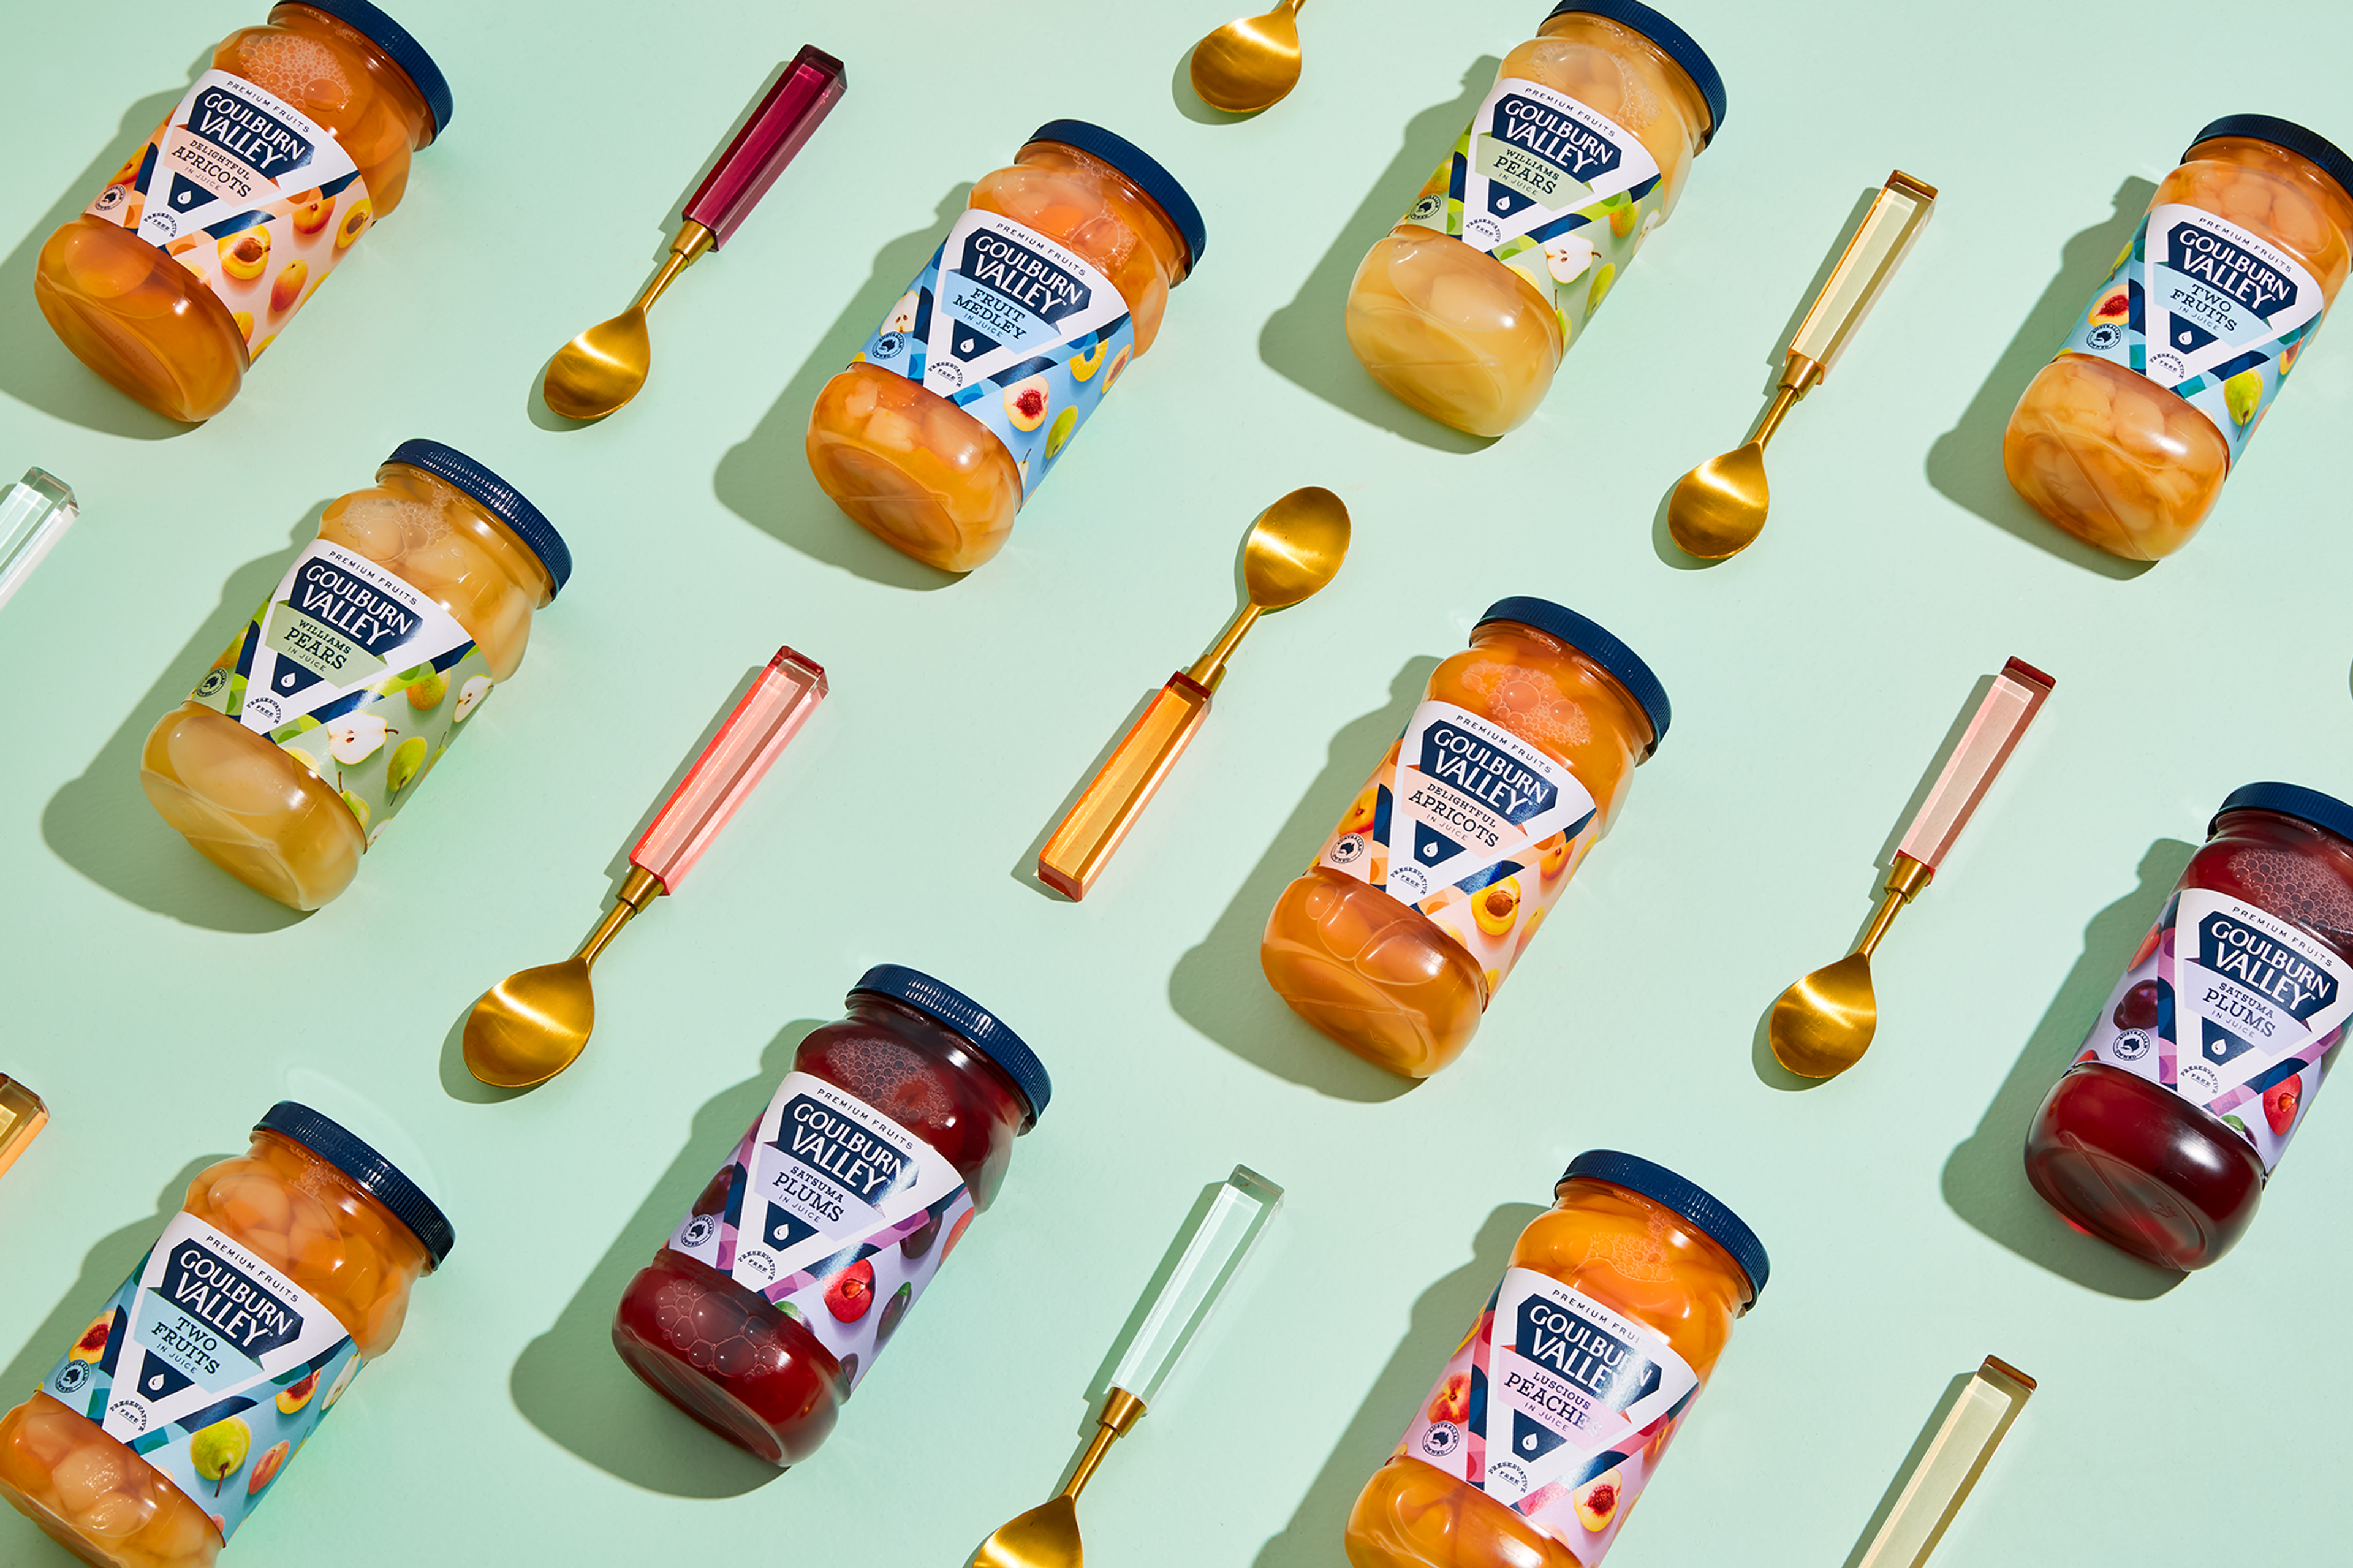 Bold tiled packaging design for Goulburn Valley fruit brand with retro metal spoons art directed and designed by Sydney brand studio Our Revolution